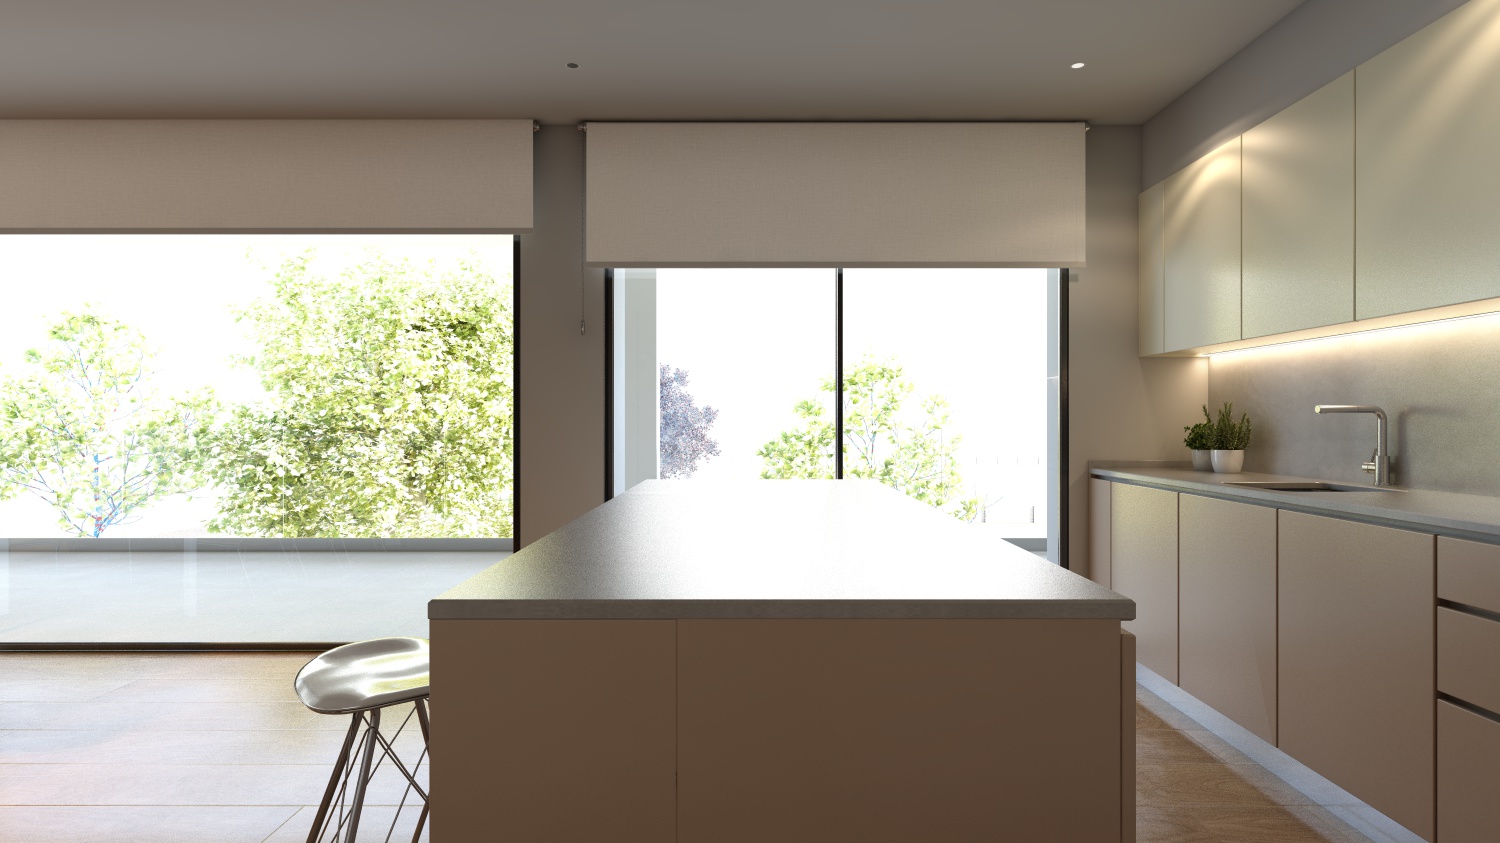 Kitchen render image of a block of flats in Lleida by GAYARRE infografia